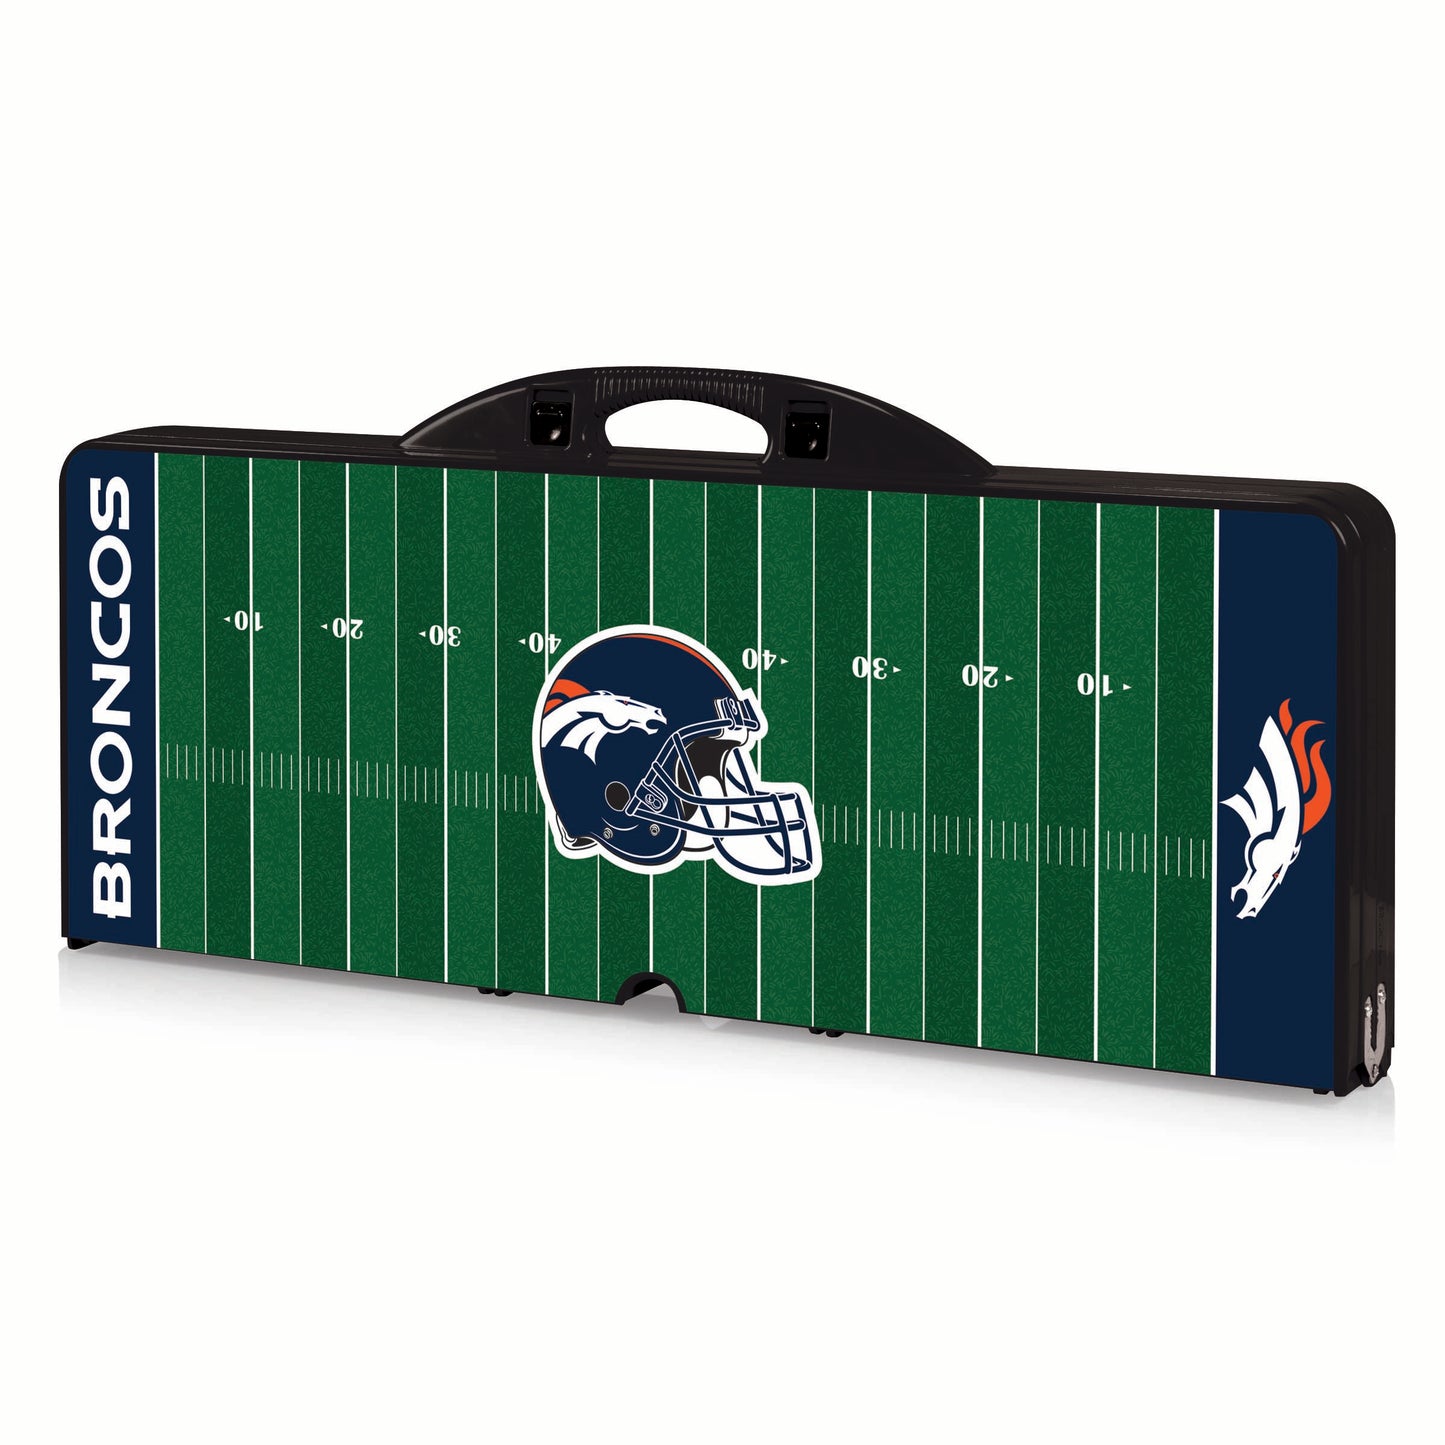 Denver Broncos - Picnic Table Portable Folding Table with Seats and Umbrella